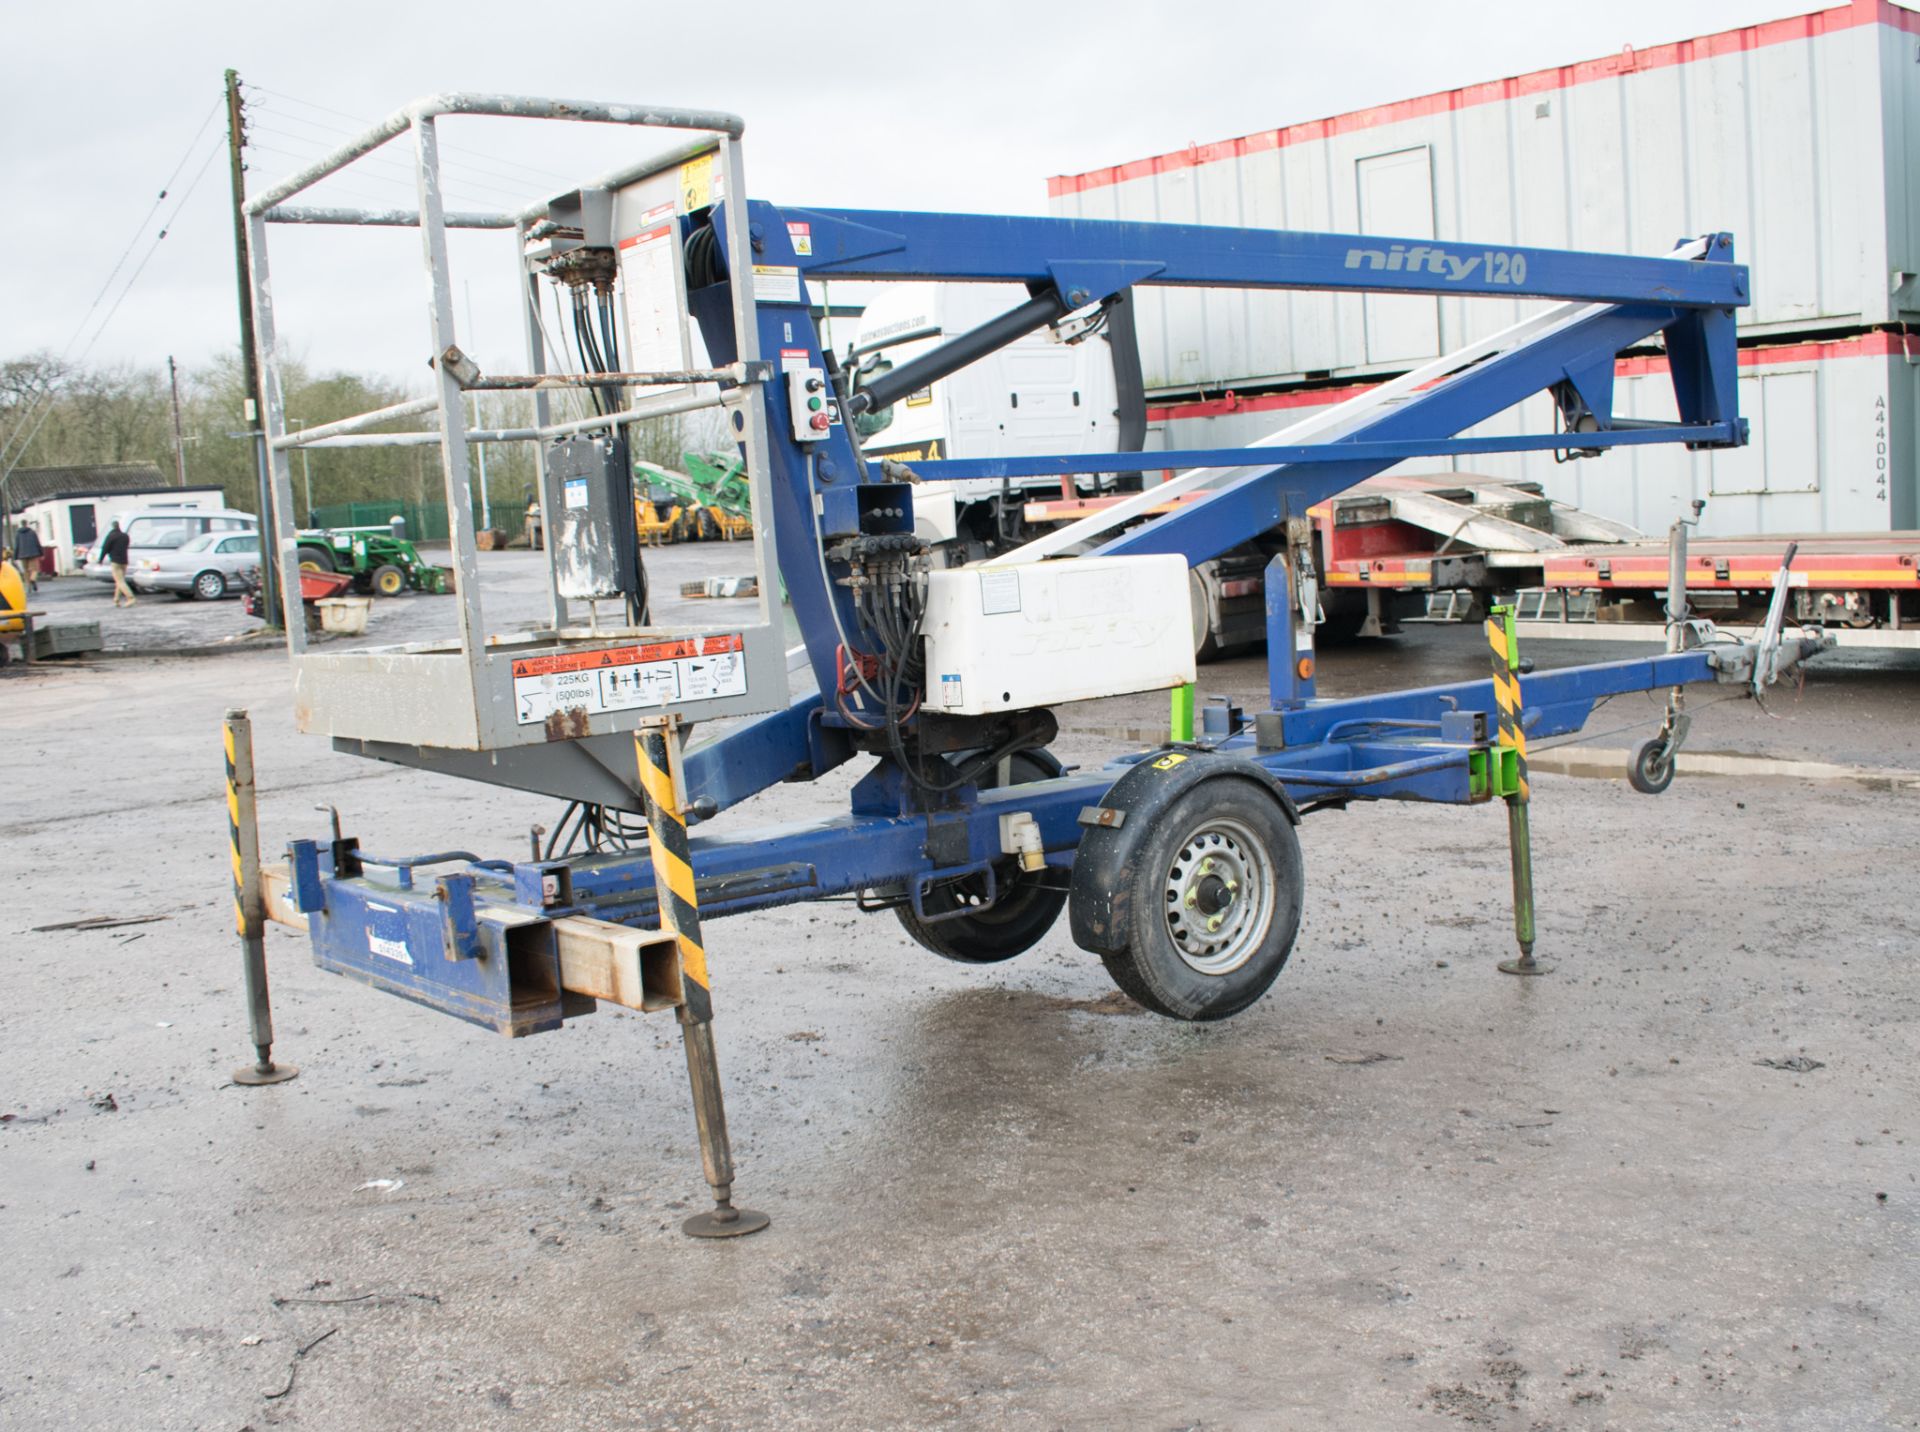 Nifty 120 ME fast tow articulated boom lift access platform Year: 2006 S/N: 015149 08660045 - Image 4 of 9